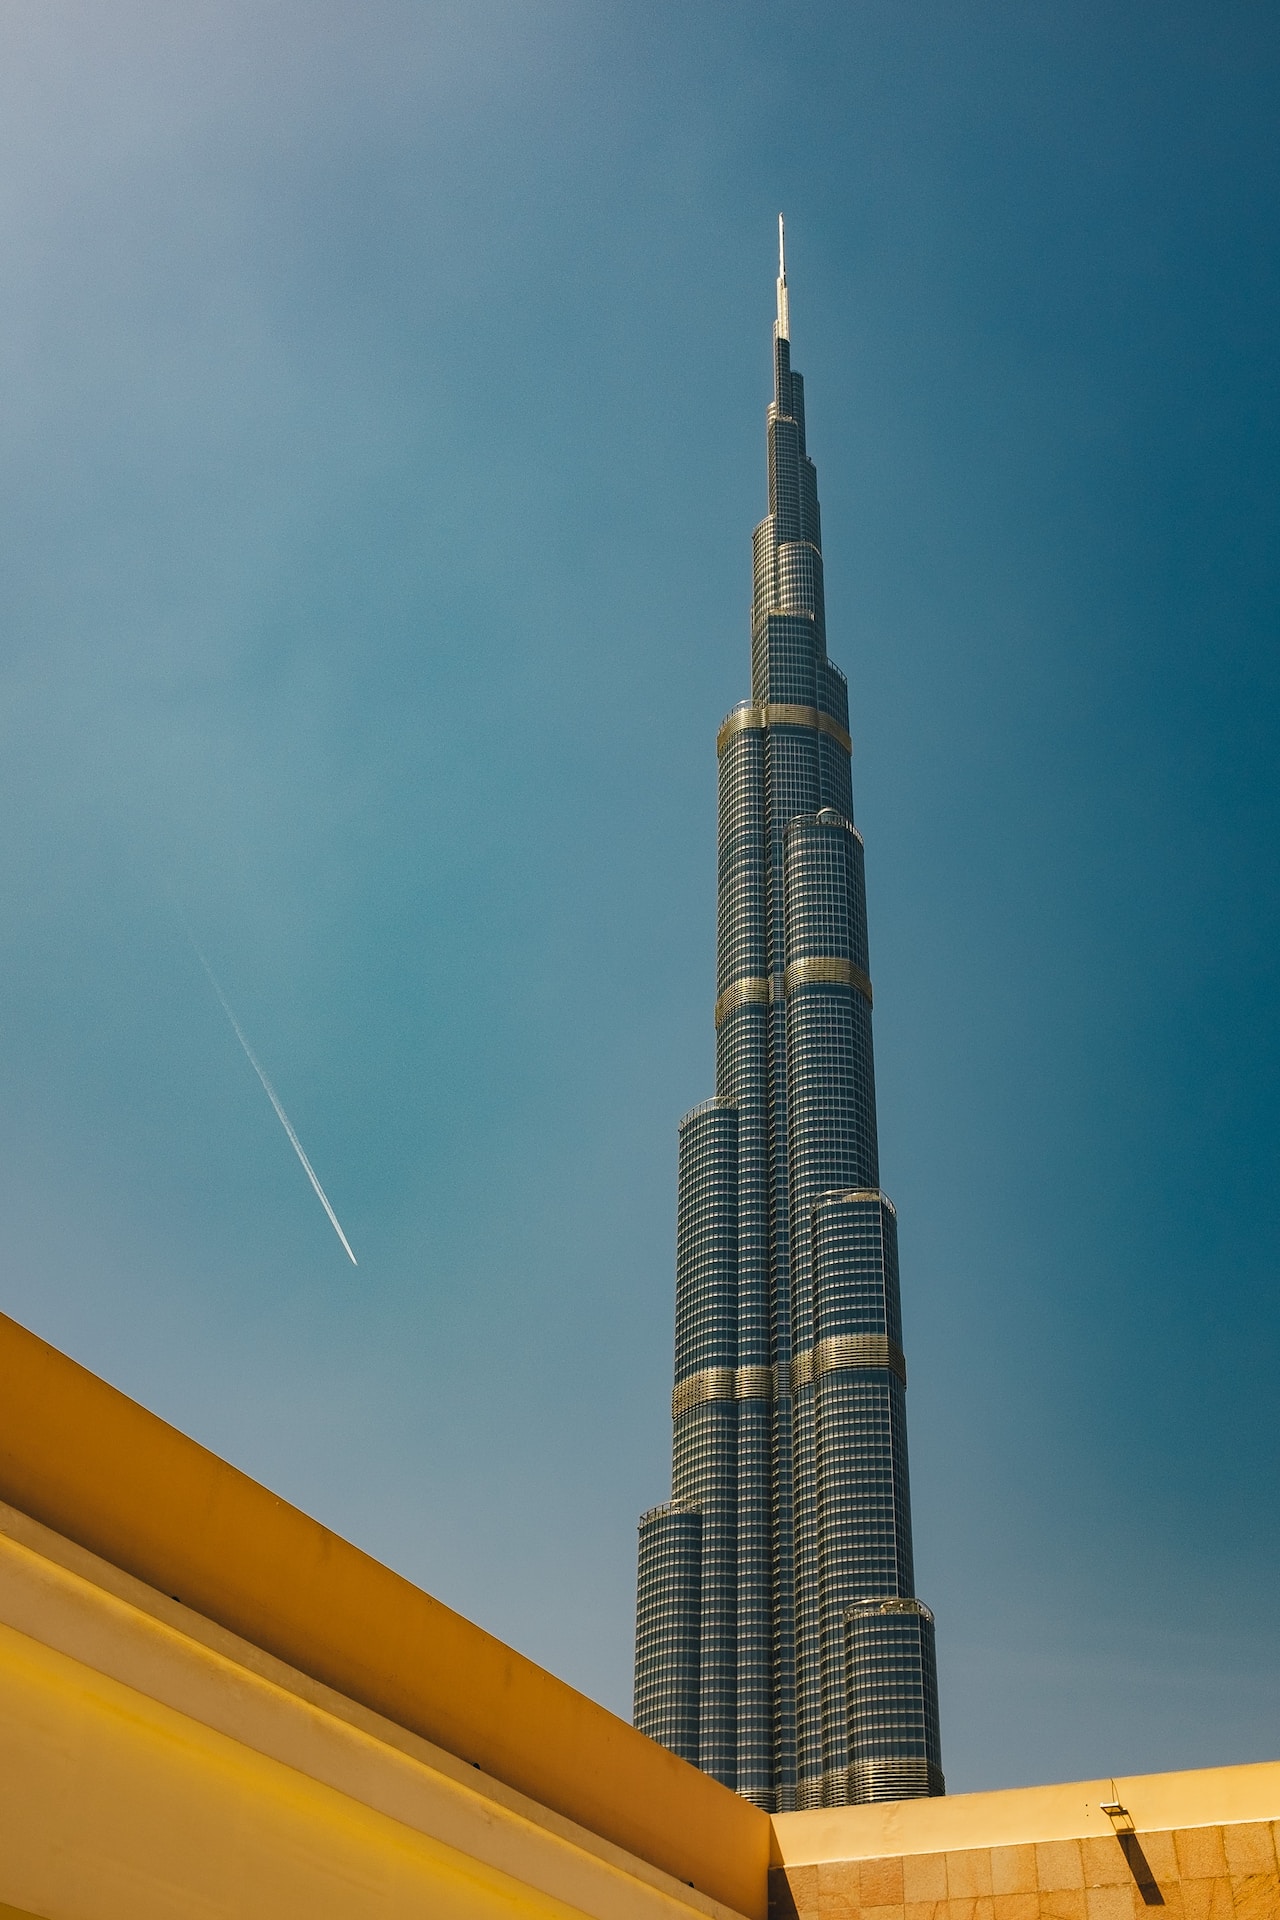 Who is the Indian owner of Burj Khalifa room?